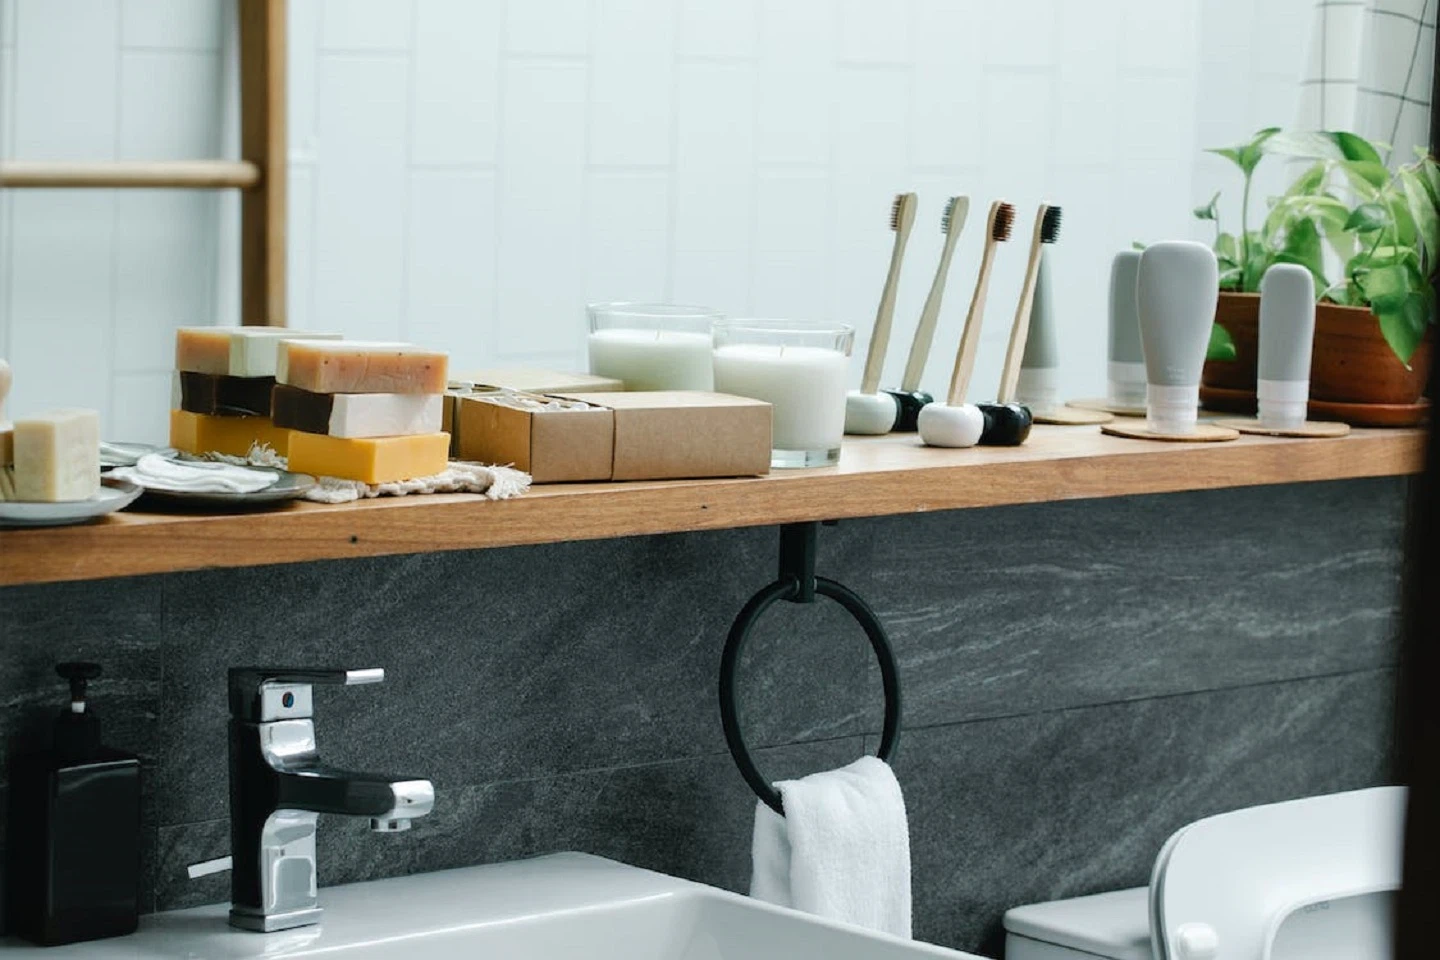 Bathroom Shelves Personalization and Reflection of Style